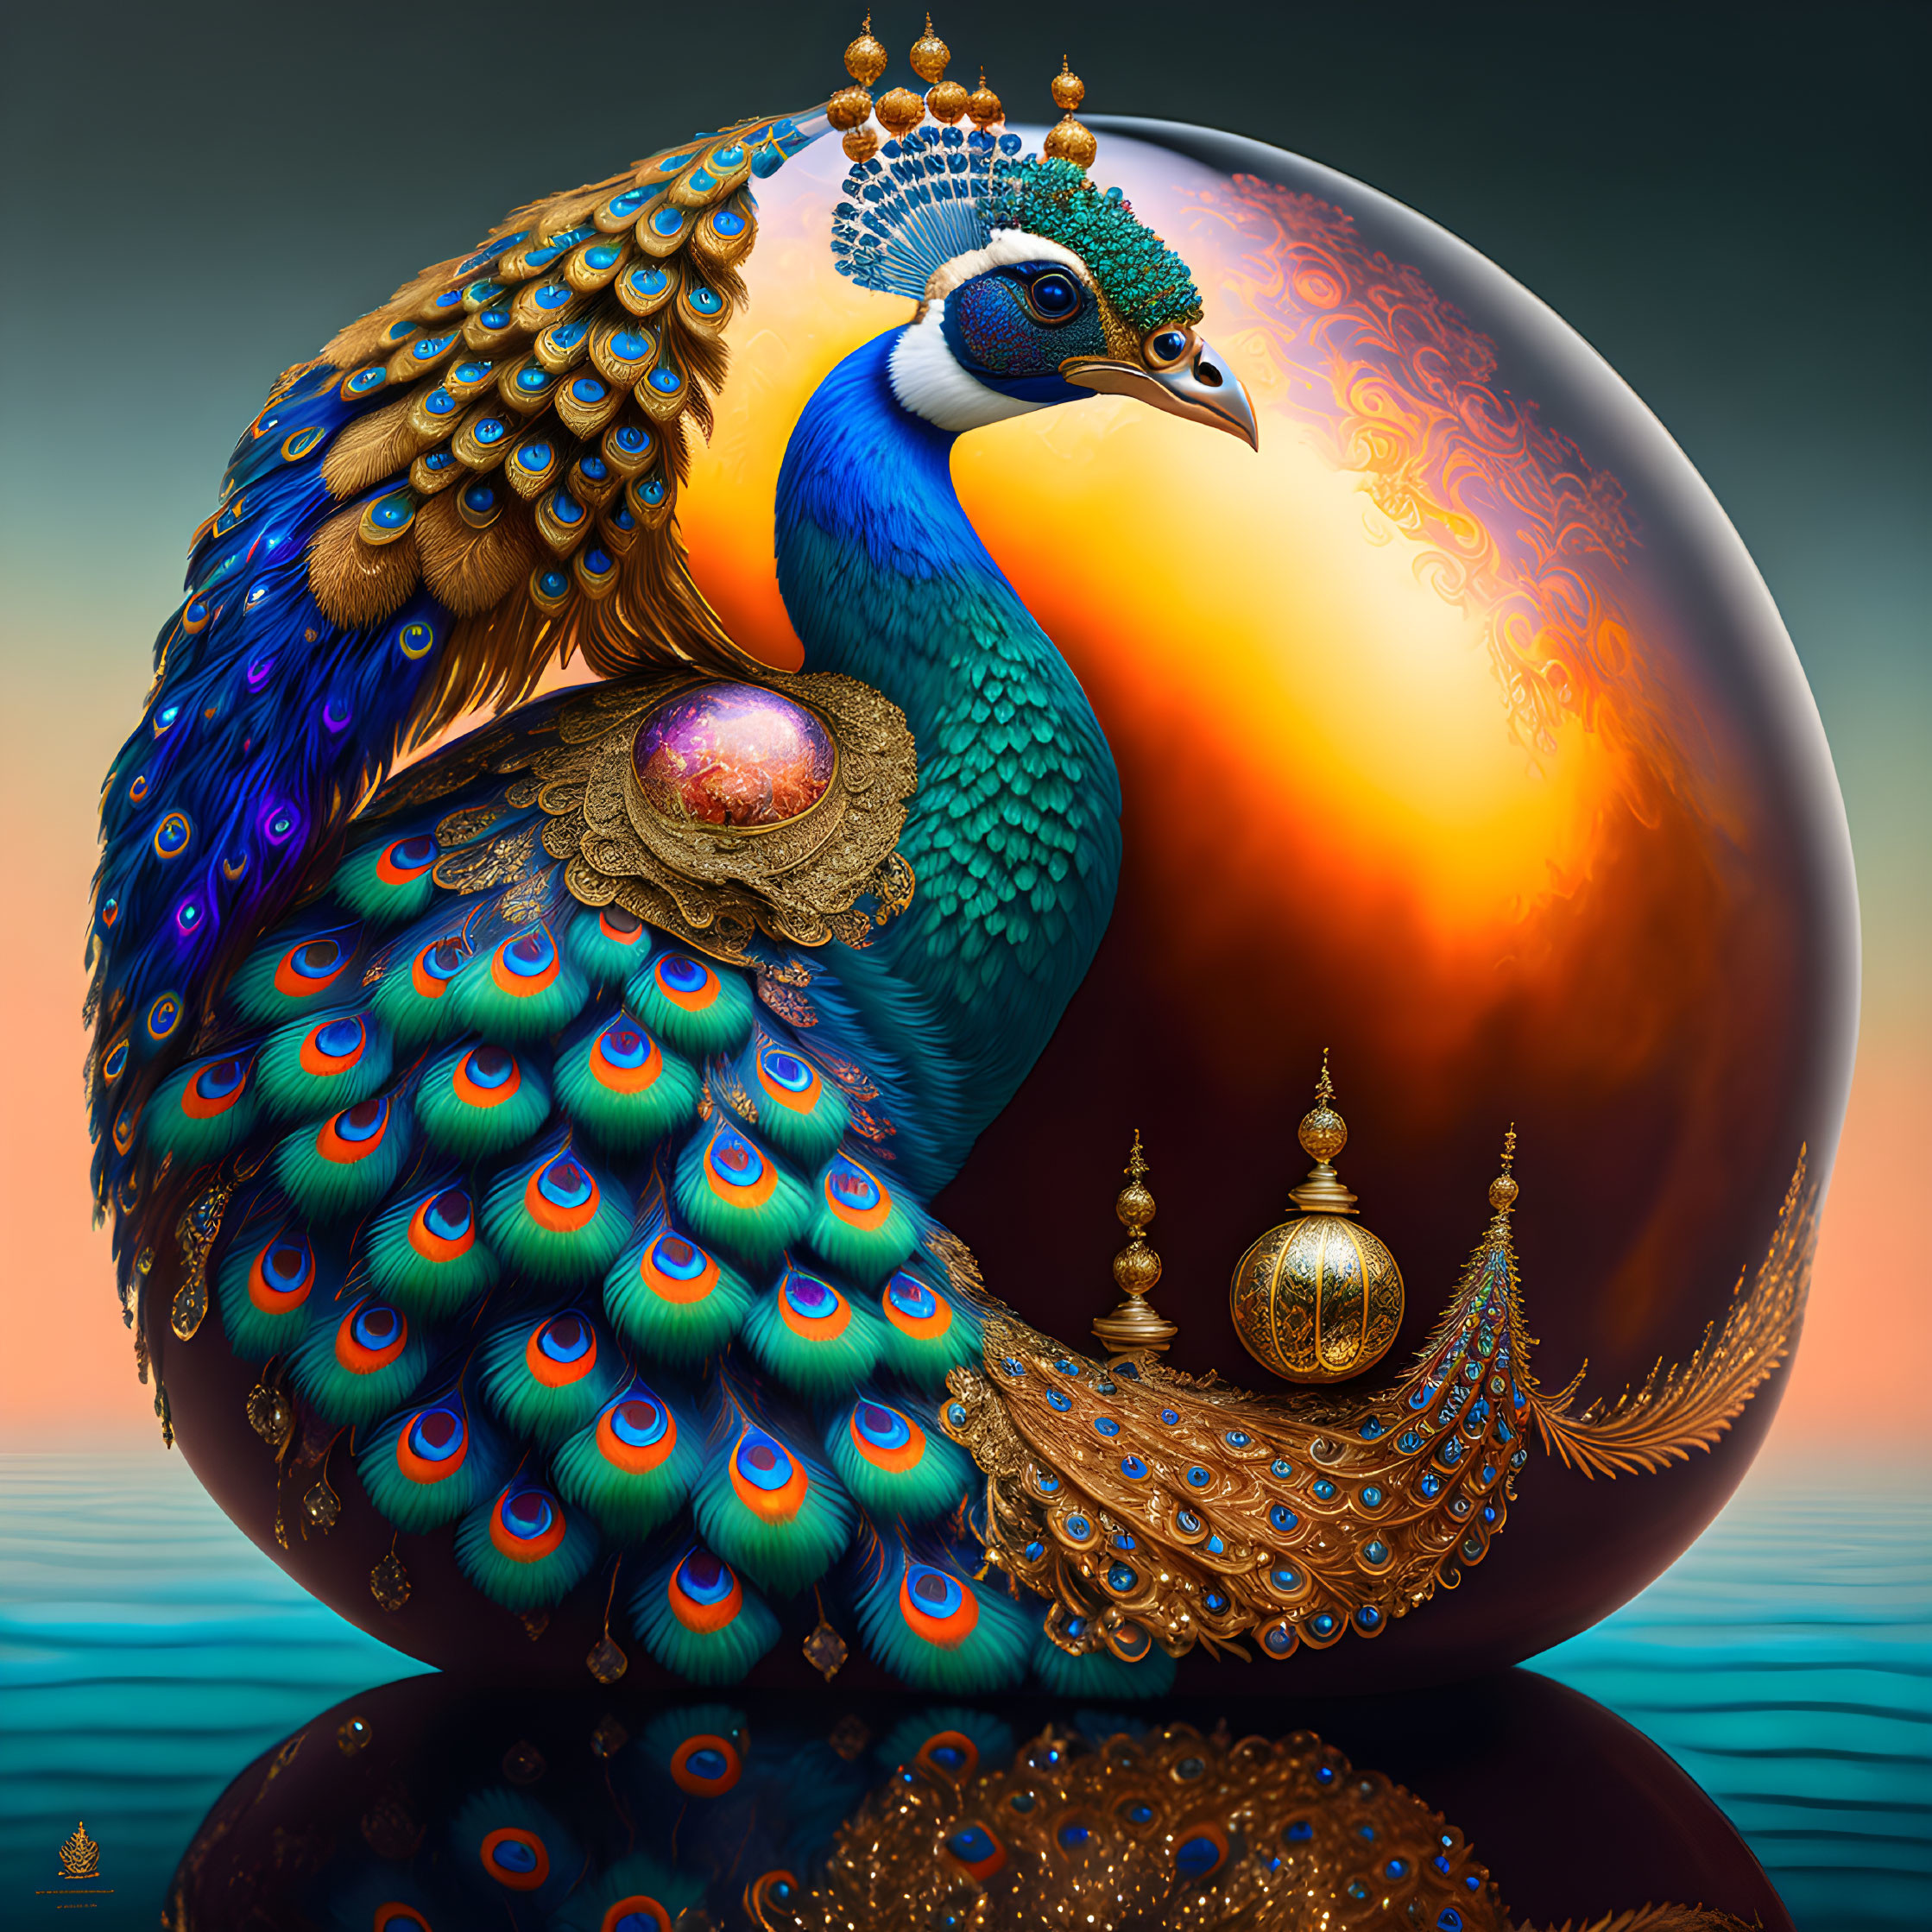 Colorful peacock digital art with ornate feathers and golden jewelry beside orange sphere